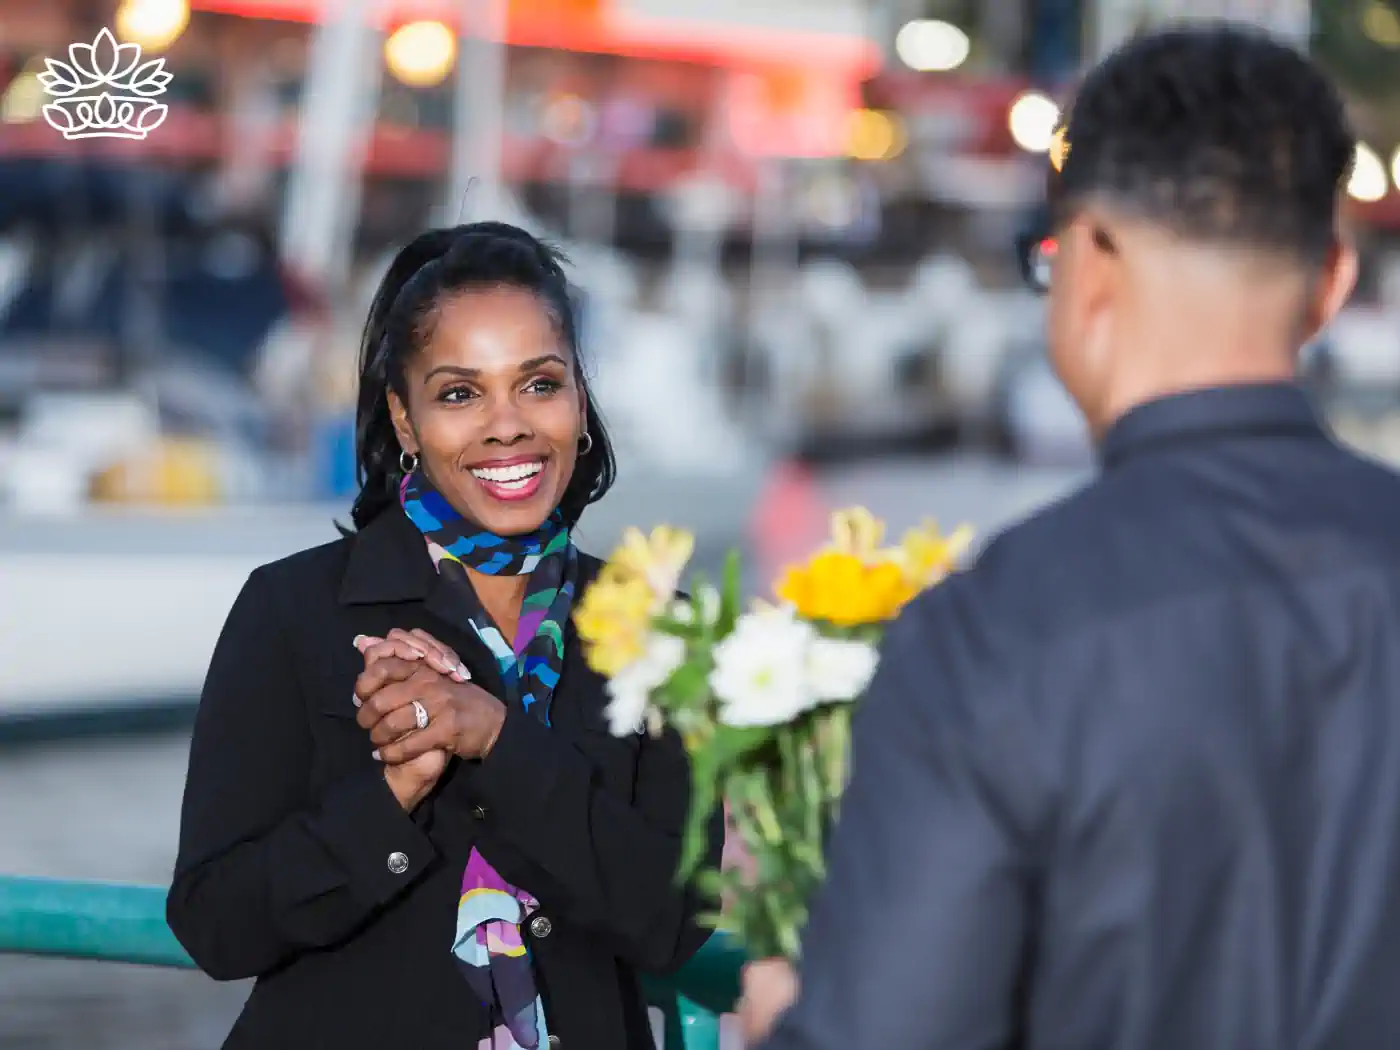 Woman joyfully reacting to a flower bouquet given by a man at a marina. Fabulous Flowers and Gifts, Luxury Flower Arrangements.